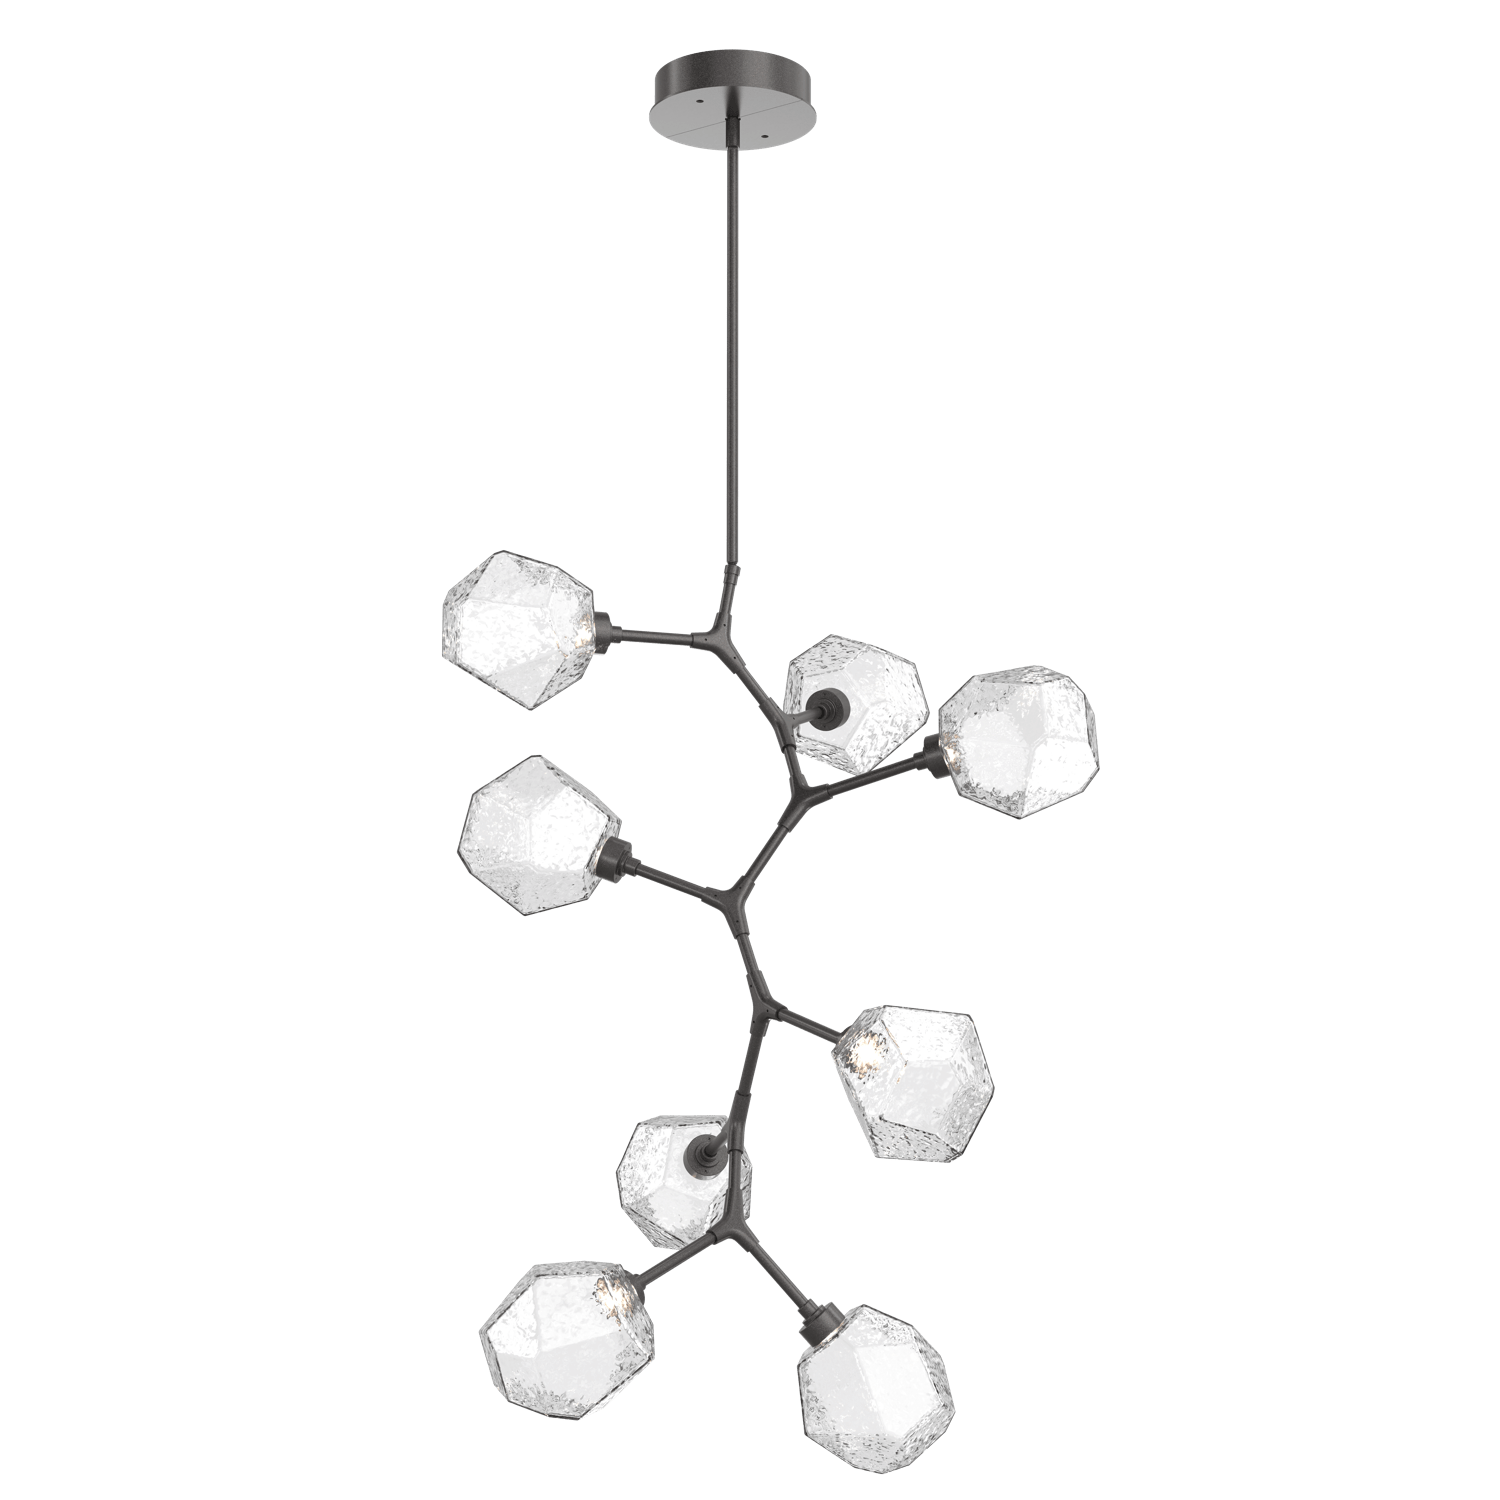 CHB0039-VB-GP-C-Hammerton-Studio-Gem-8-light-modern-vine-chandelier-with-graphite-finish-and-clear-blown-glass-shades-and-LED-lamping